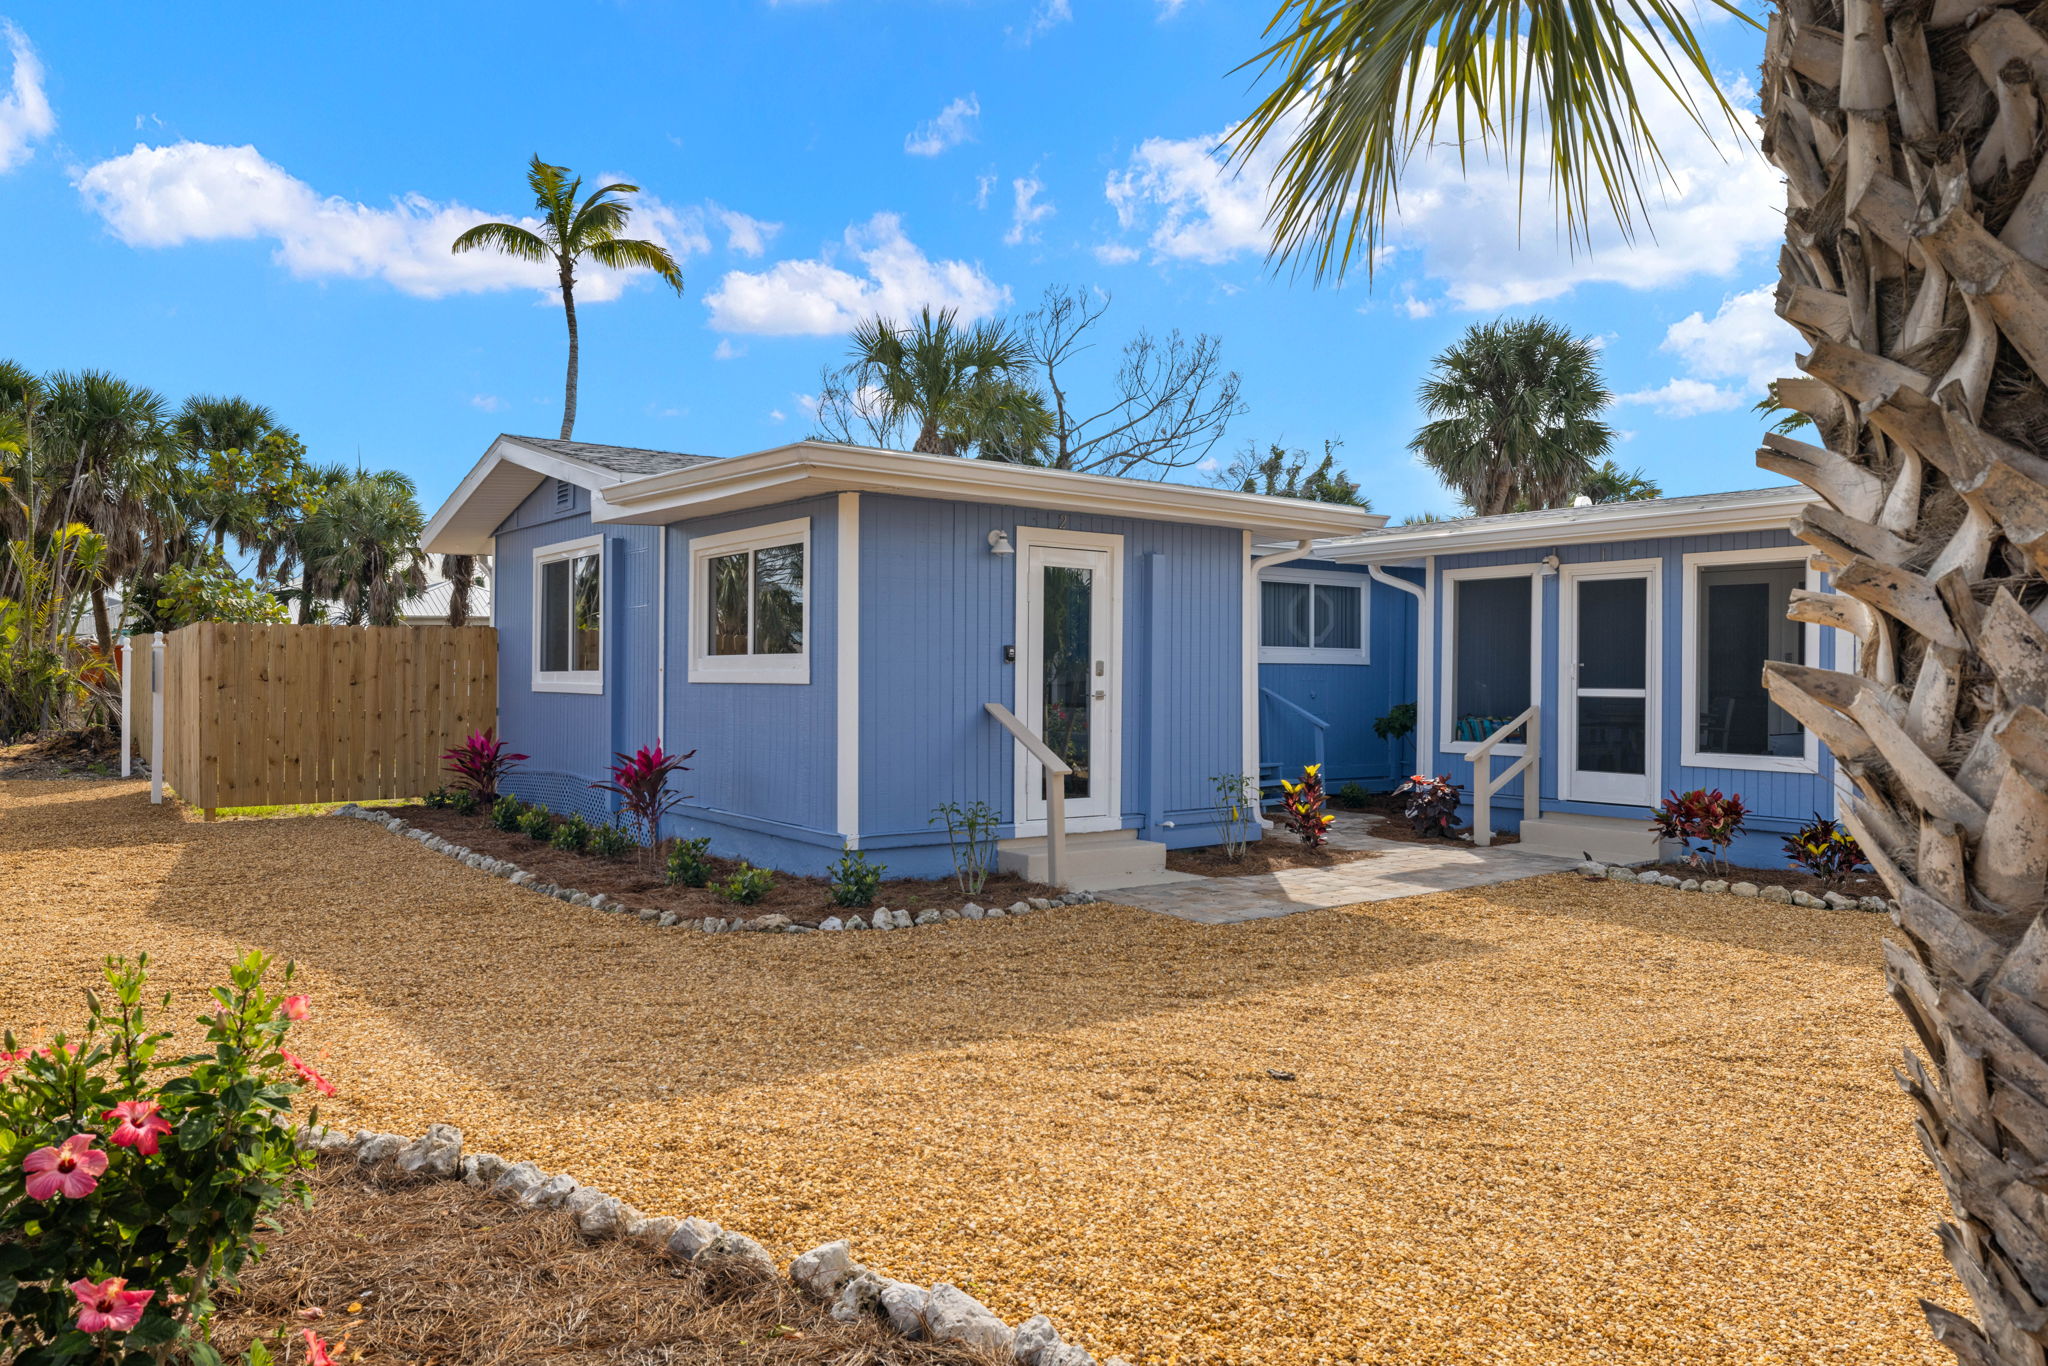 Periwinkle Cottages - The Sand Piper, Sanibel Island